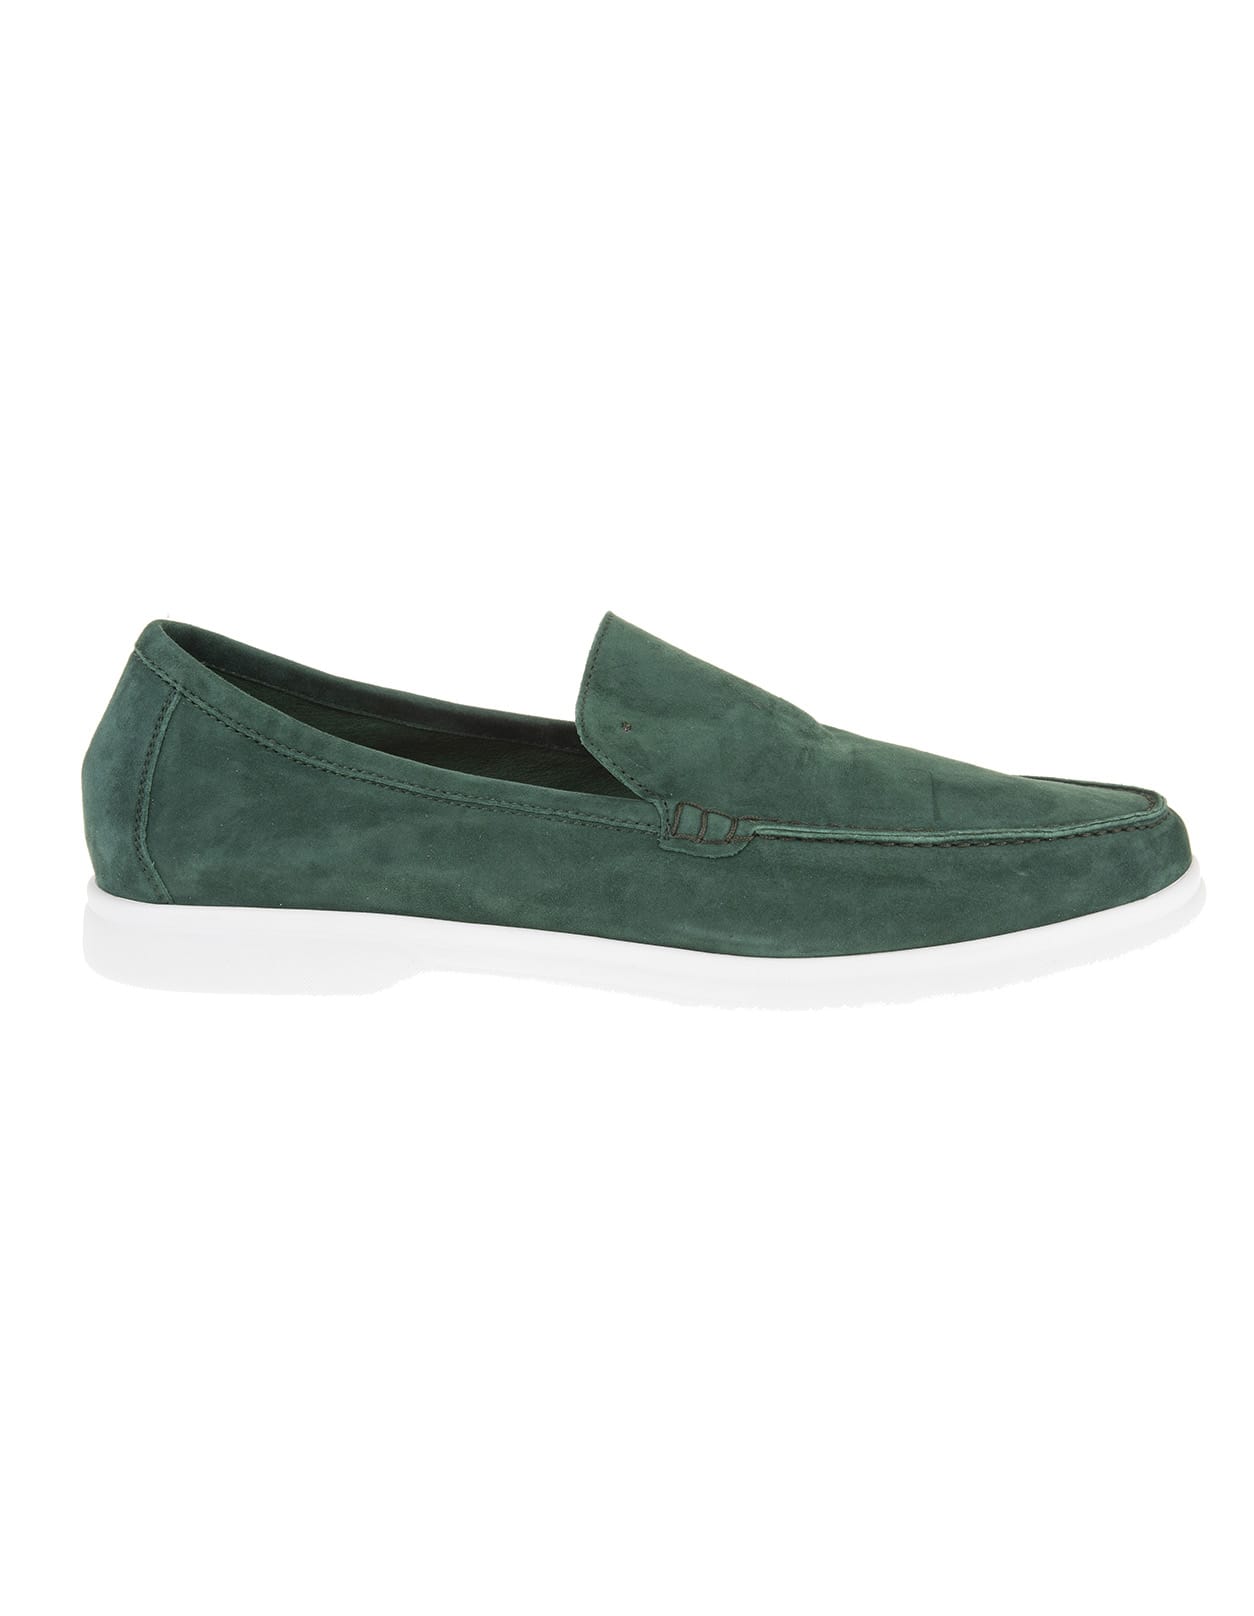 Andrea Ventura Man Green Suede Loafer With White Latex Sole